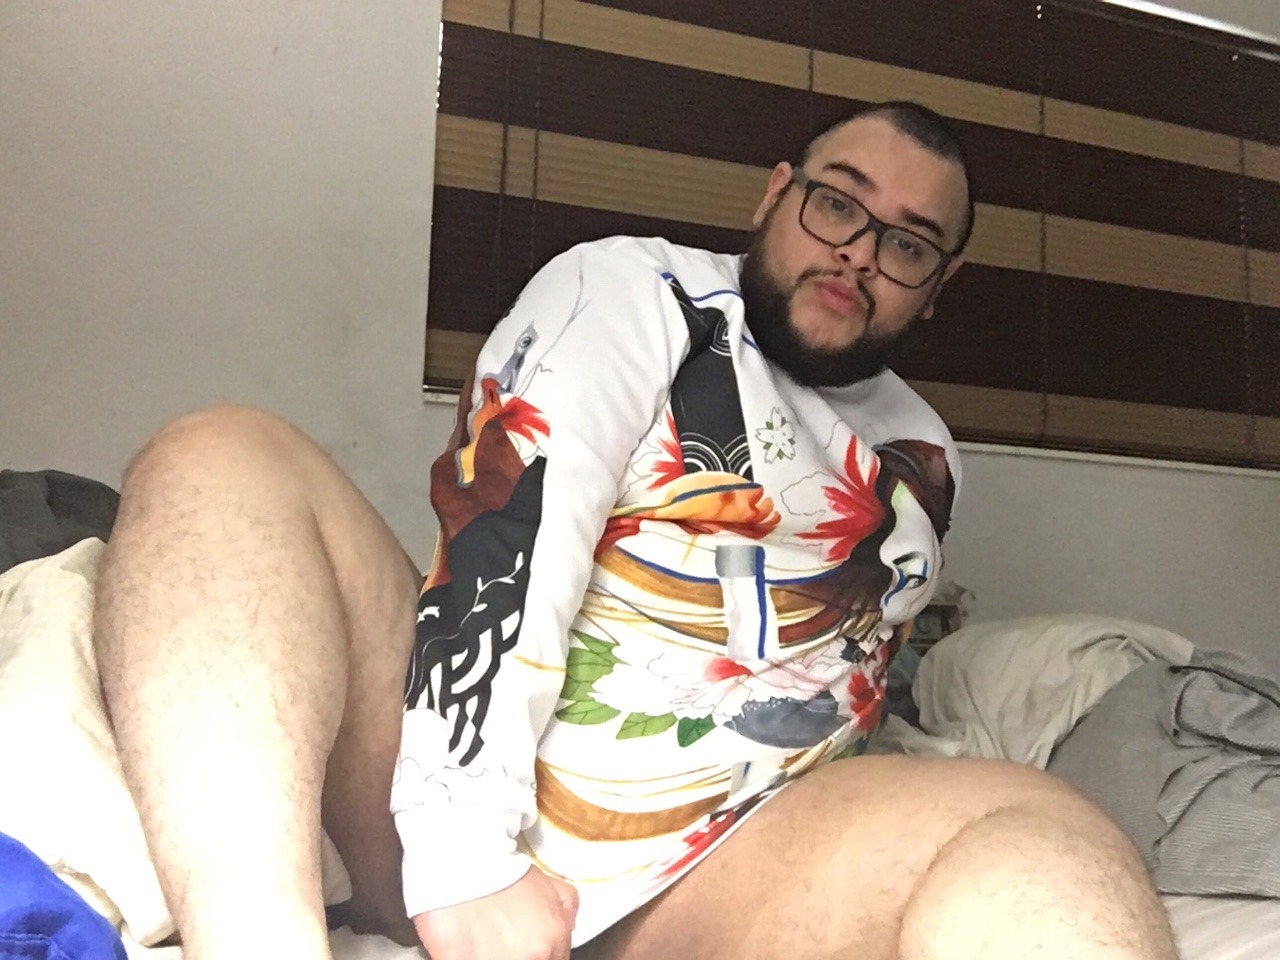 buki-monster:  Feeling sexy in my sweatshirt! Love my body for what it is! Fat, chubby,